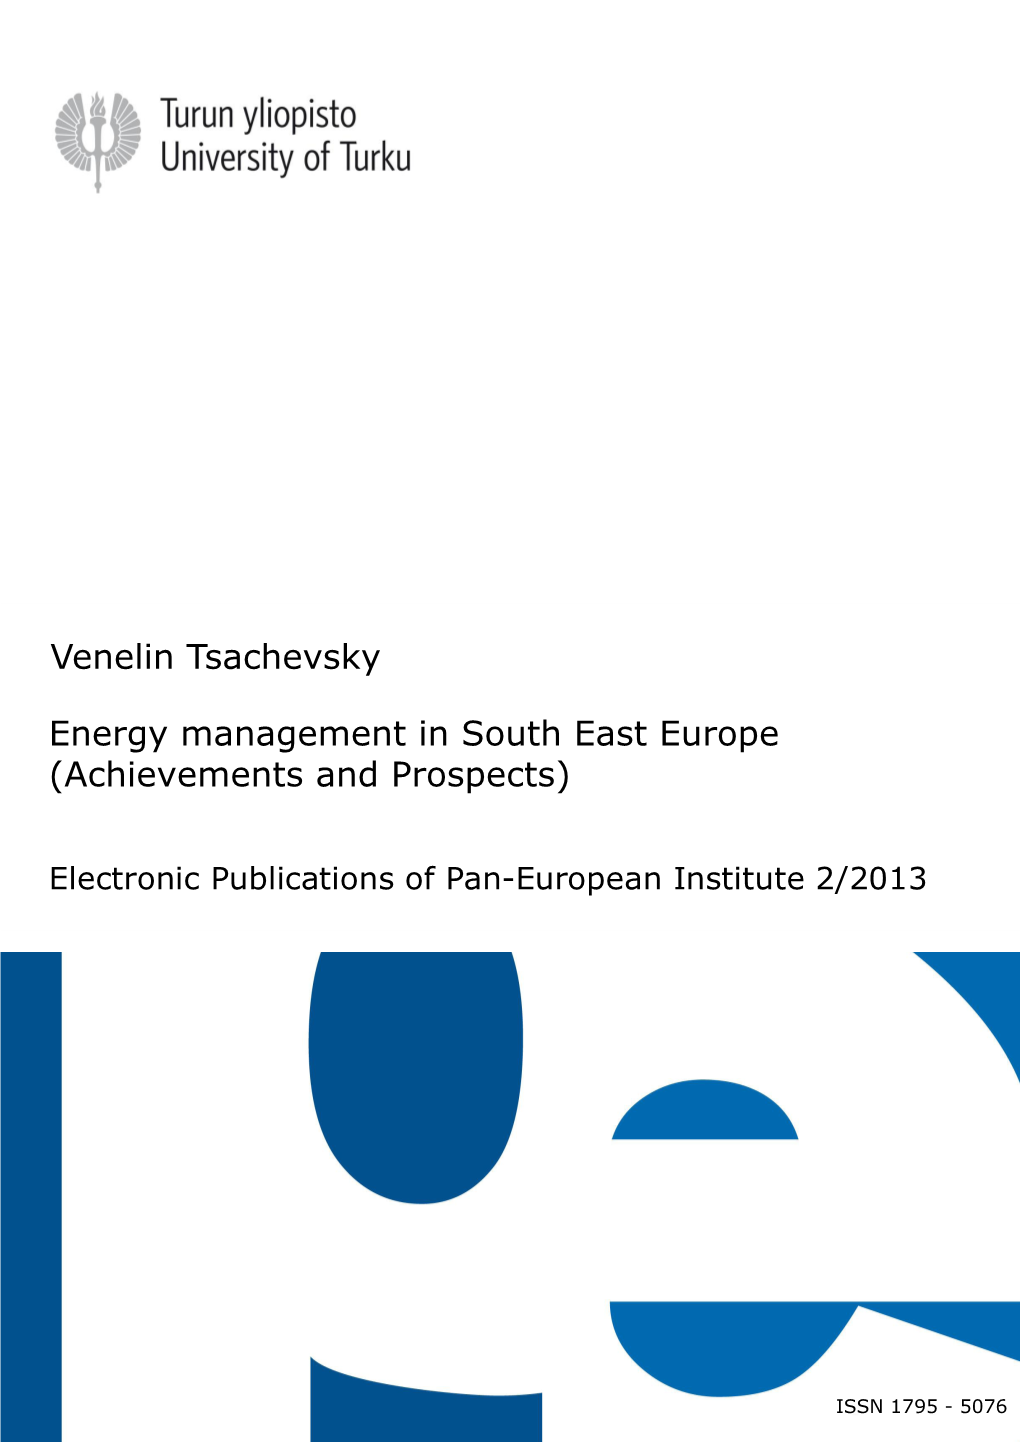 Energy Management in South East Europe (Achievements and Prospects)